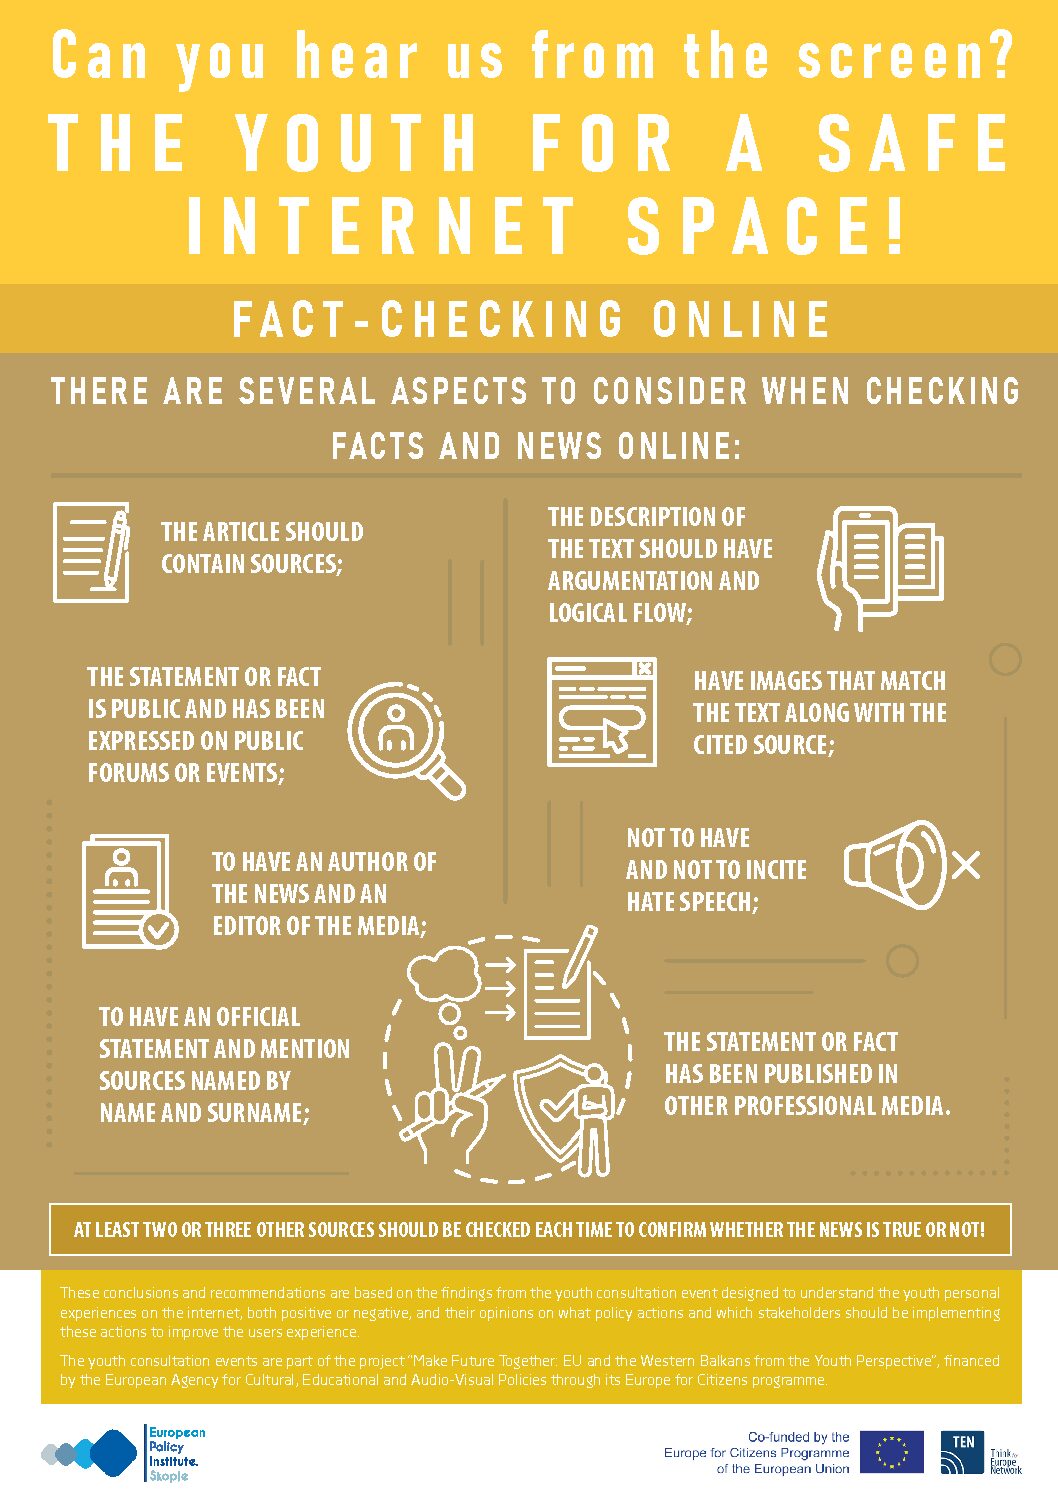 Fact-checking online